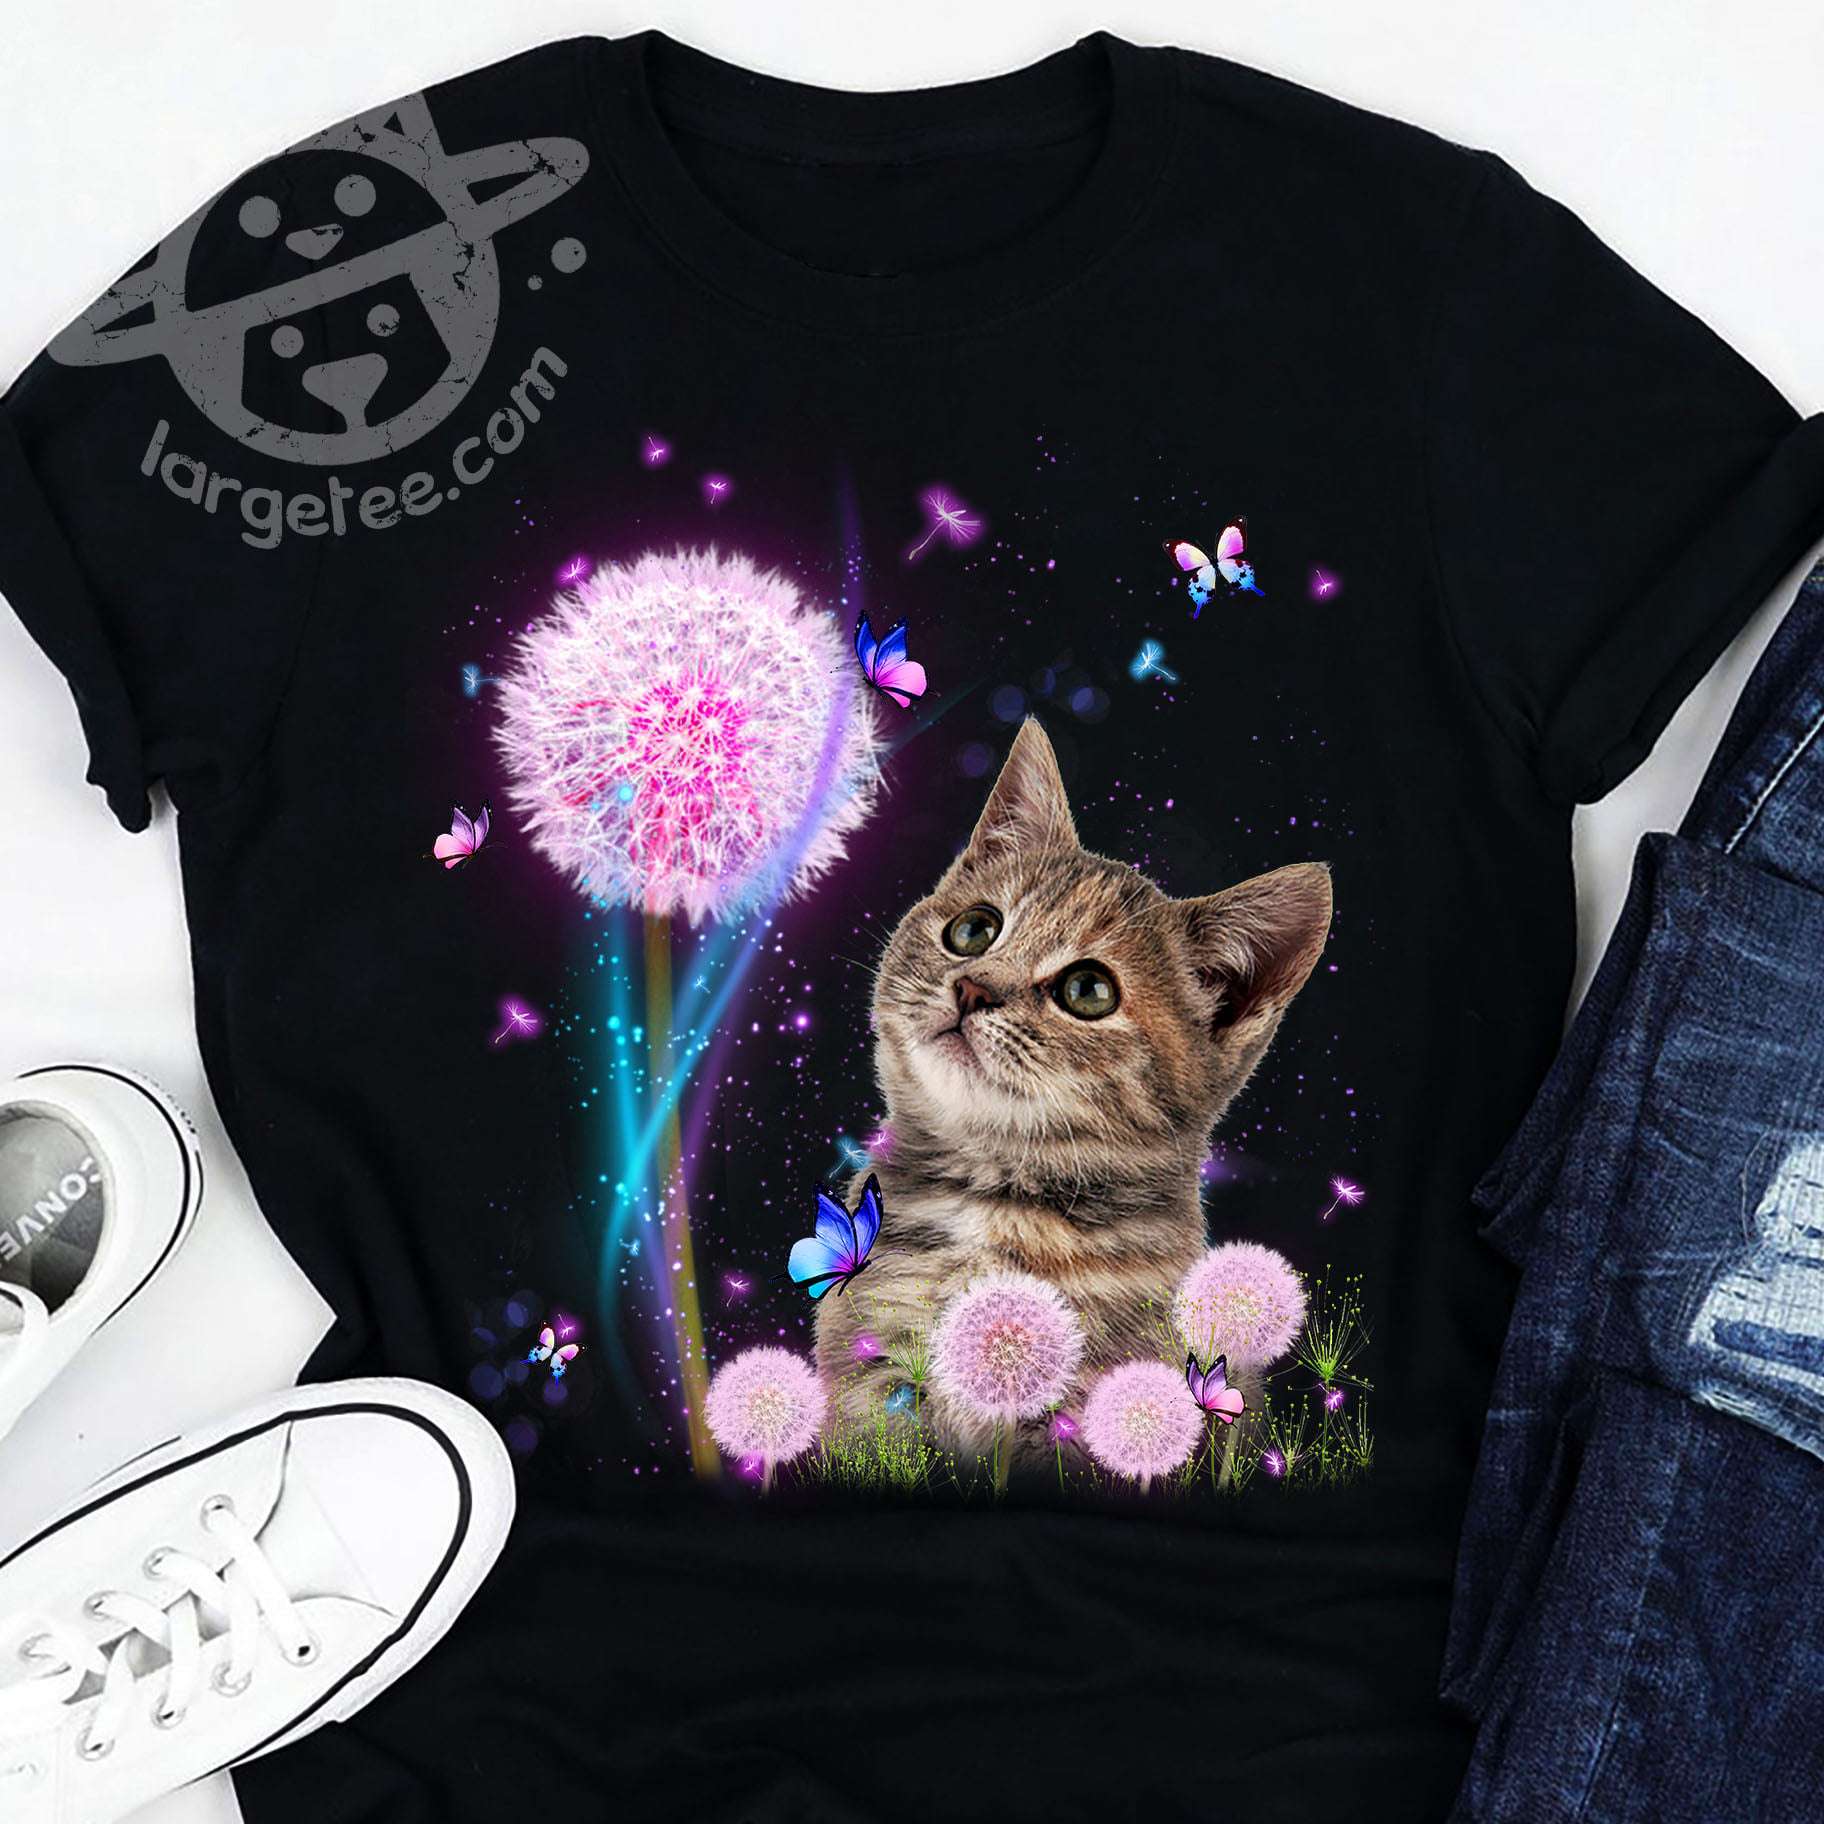 Dandelion flower and kitty - Gorgeous kitty cat, T-shirt for cat lovers